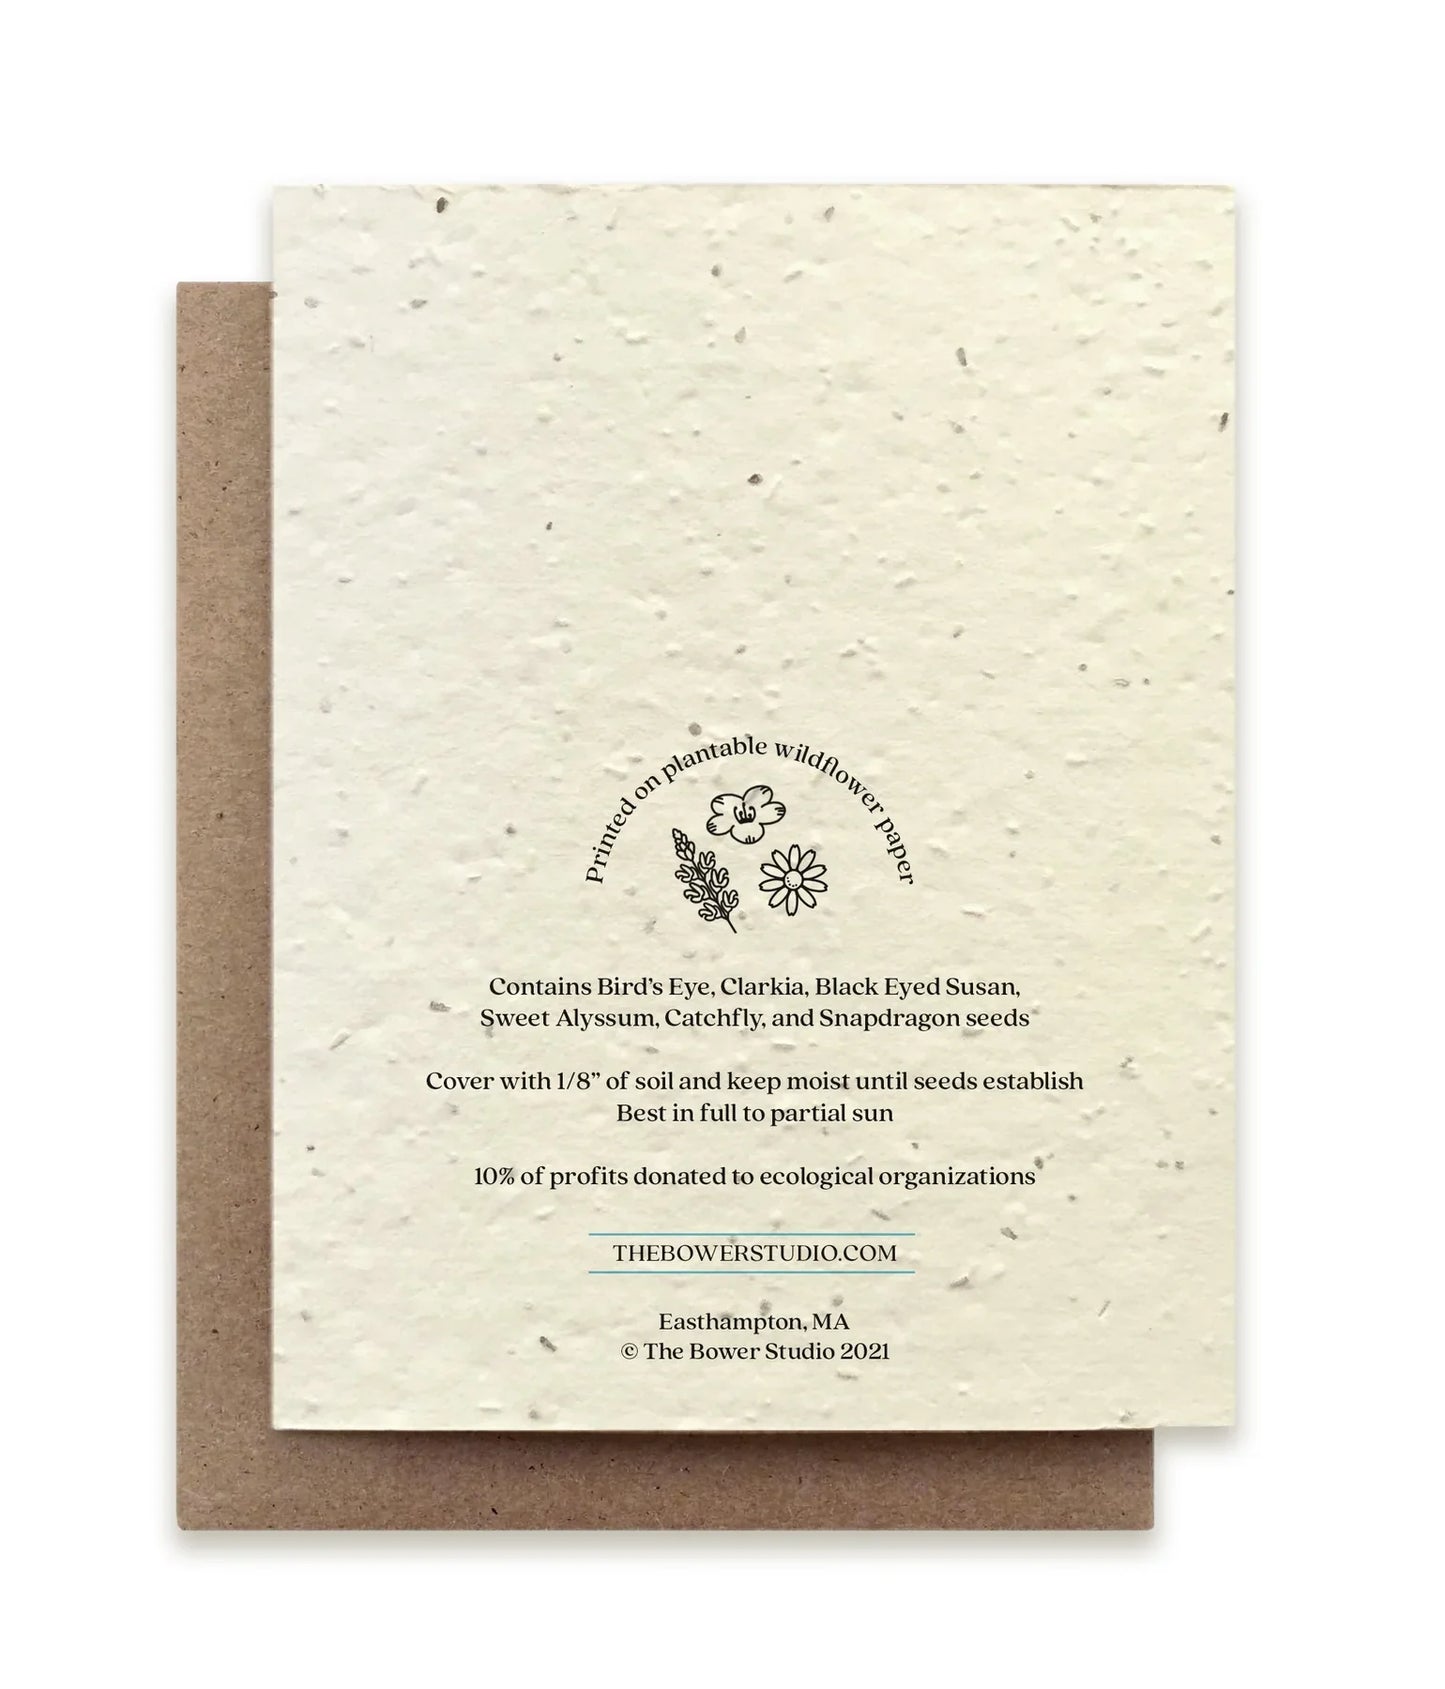 Seven-Spotted Ladybug | Plantable Wildflower Card - Bluecorn Candles